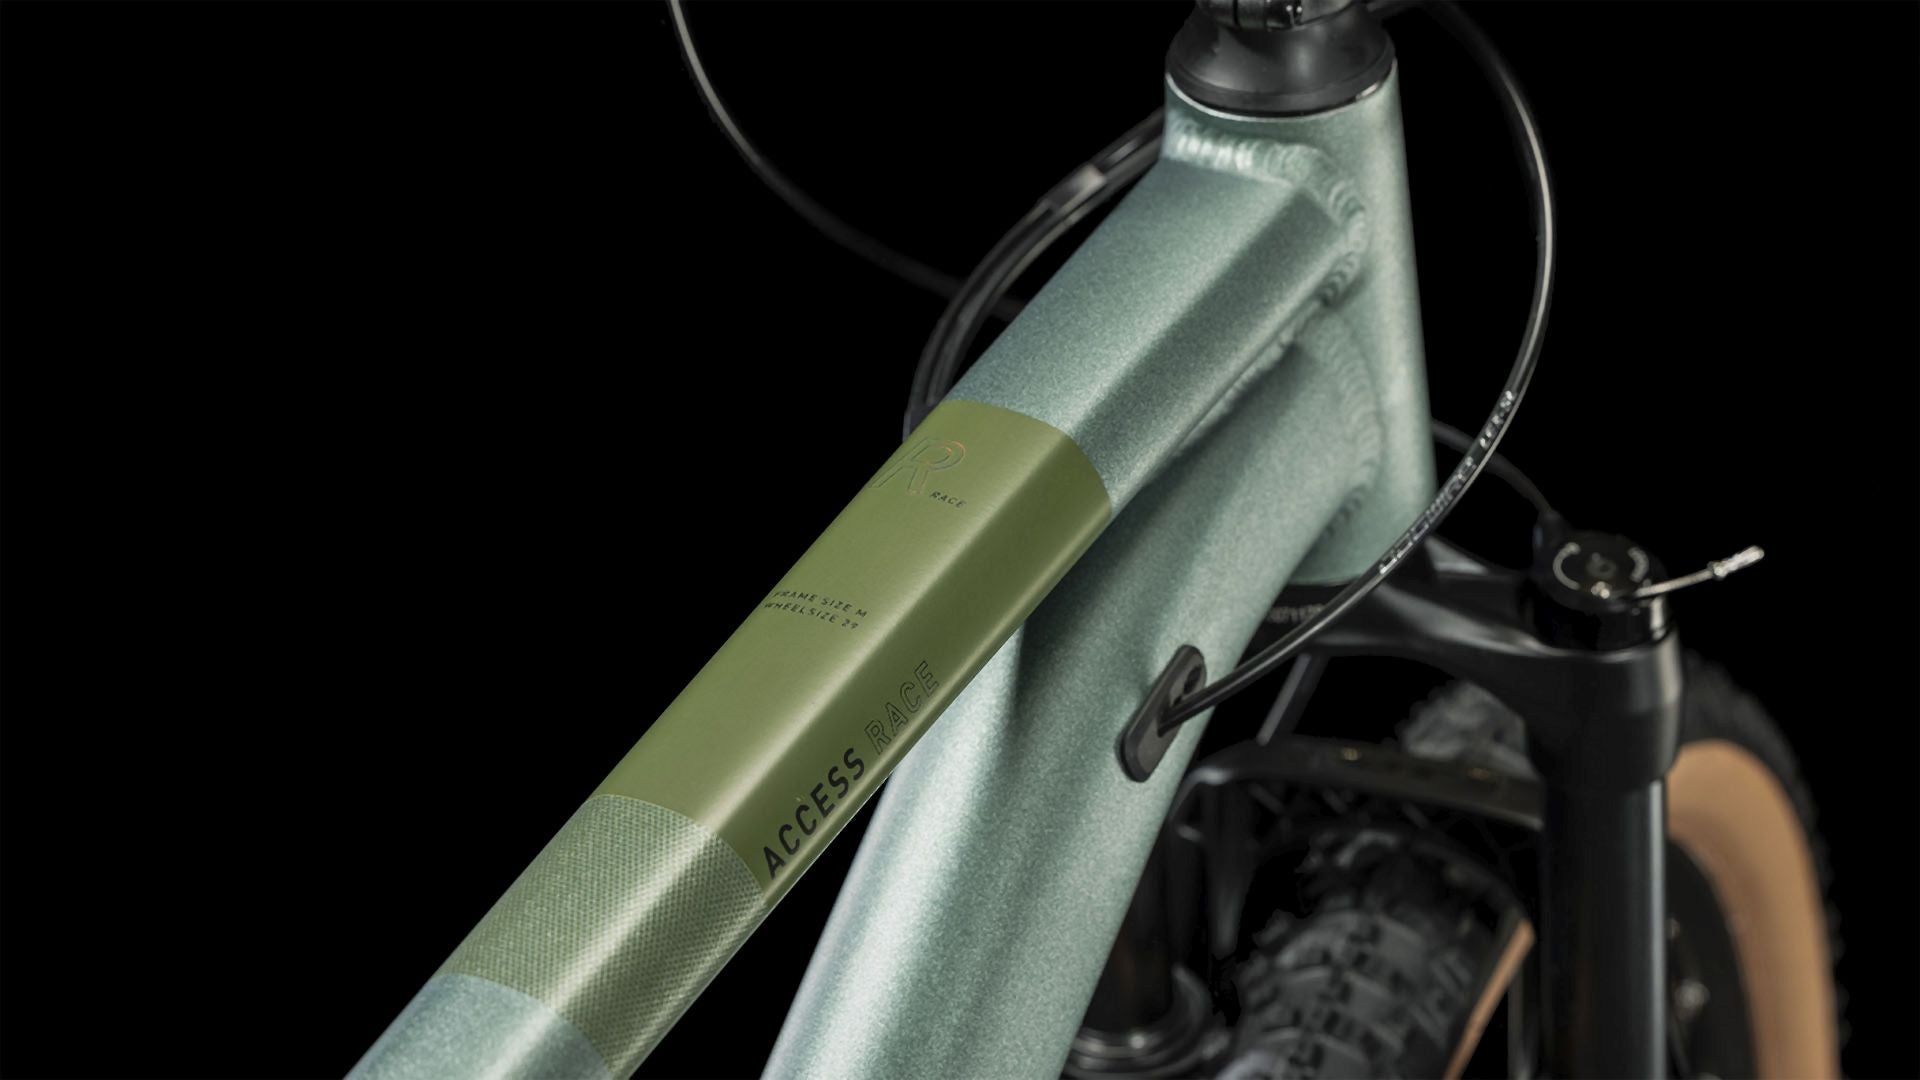 Cube Access WS Race sparkgreen´n´olive 2024